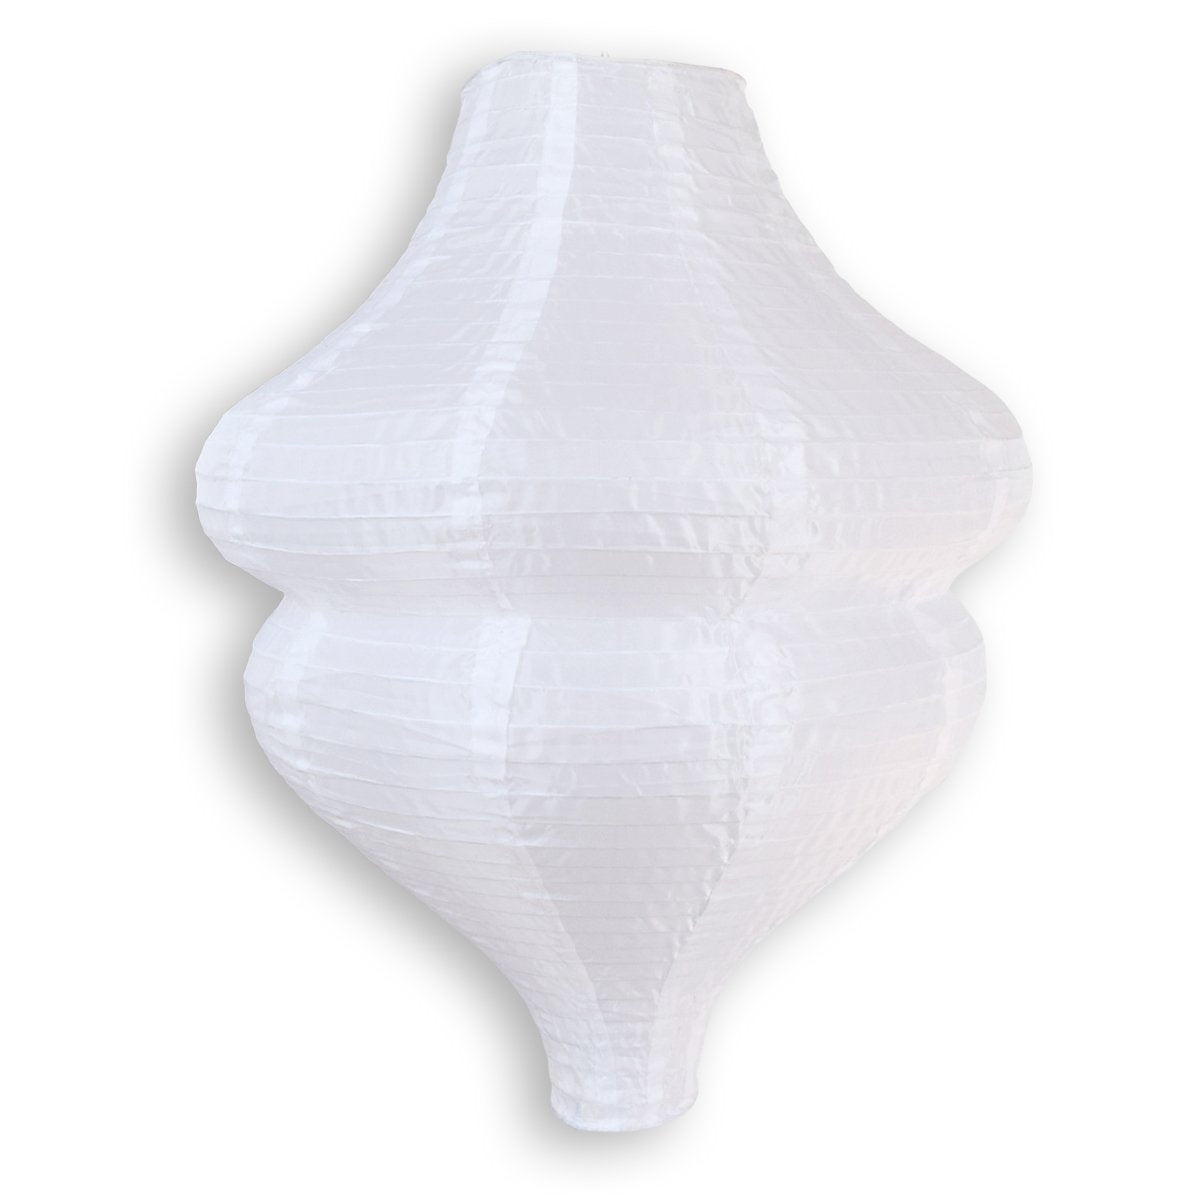 White Beehive Unique Shaped Shimmering Nylon Lantern, 24-inch x 30-inch